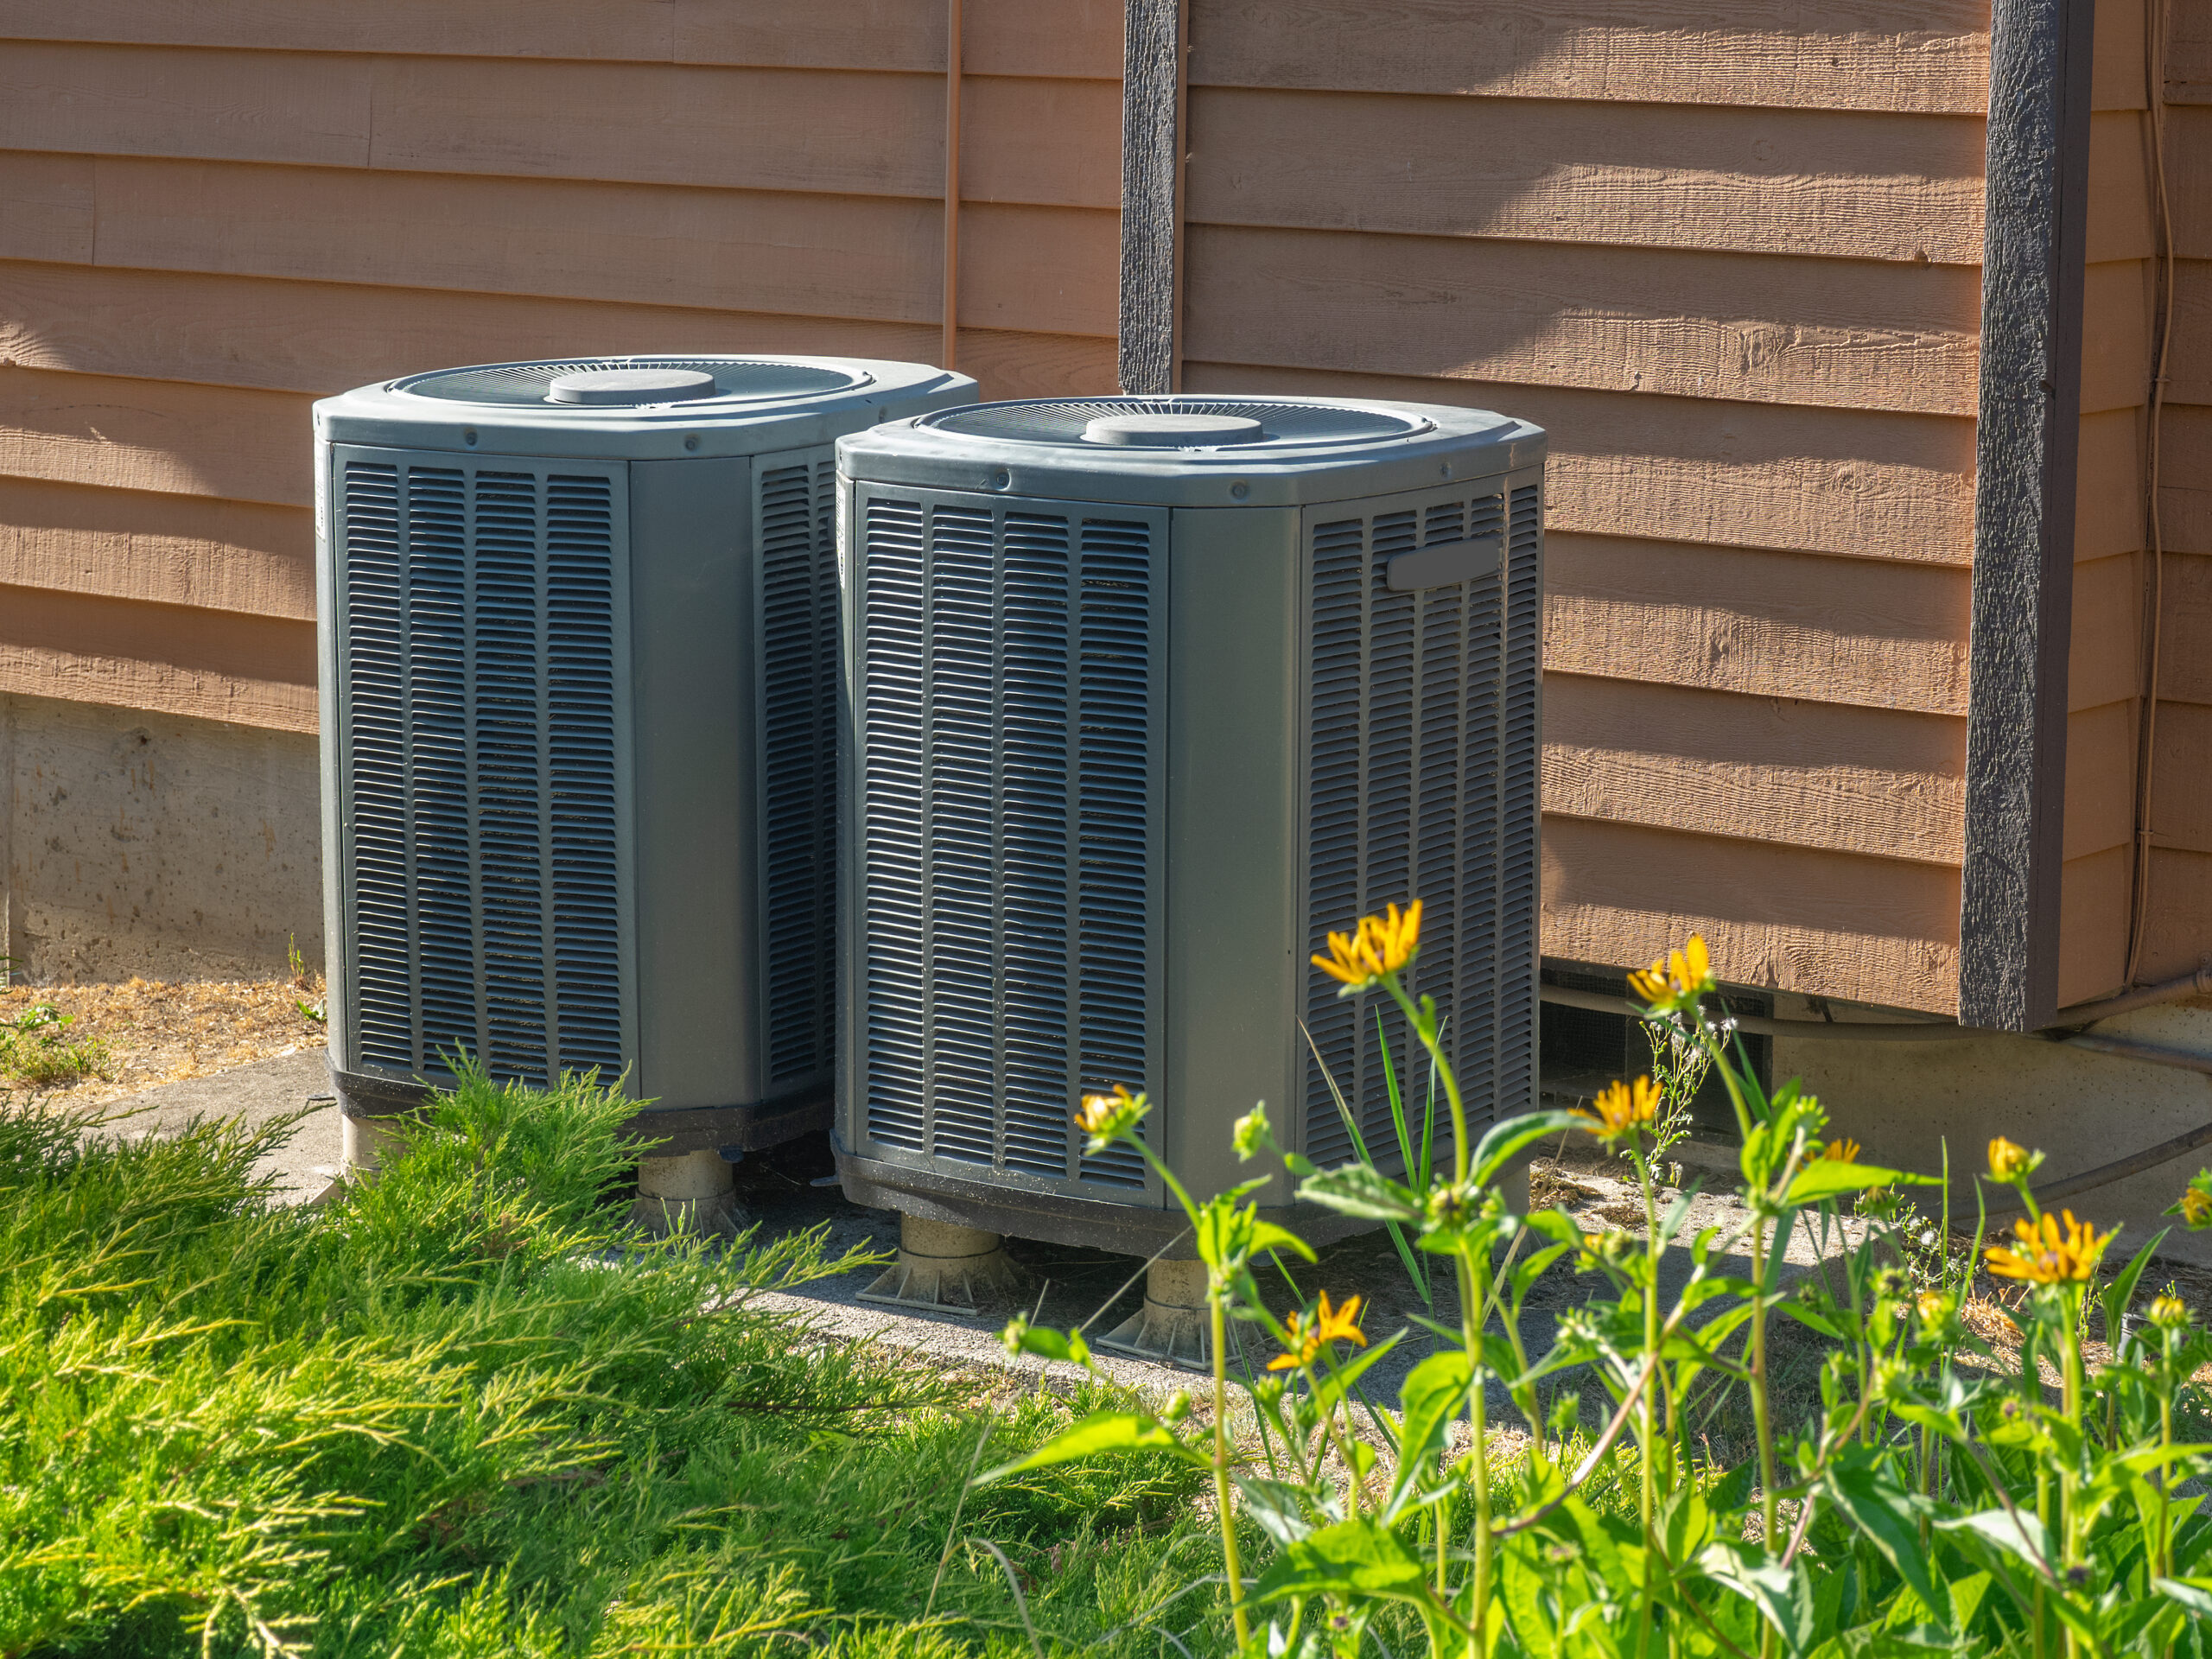 Two Residential AC Units